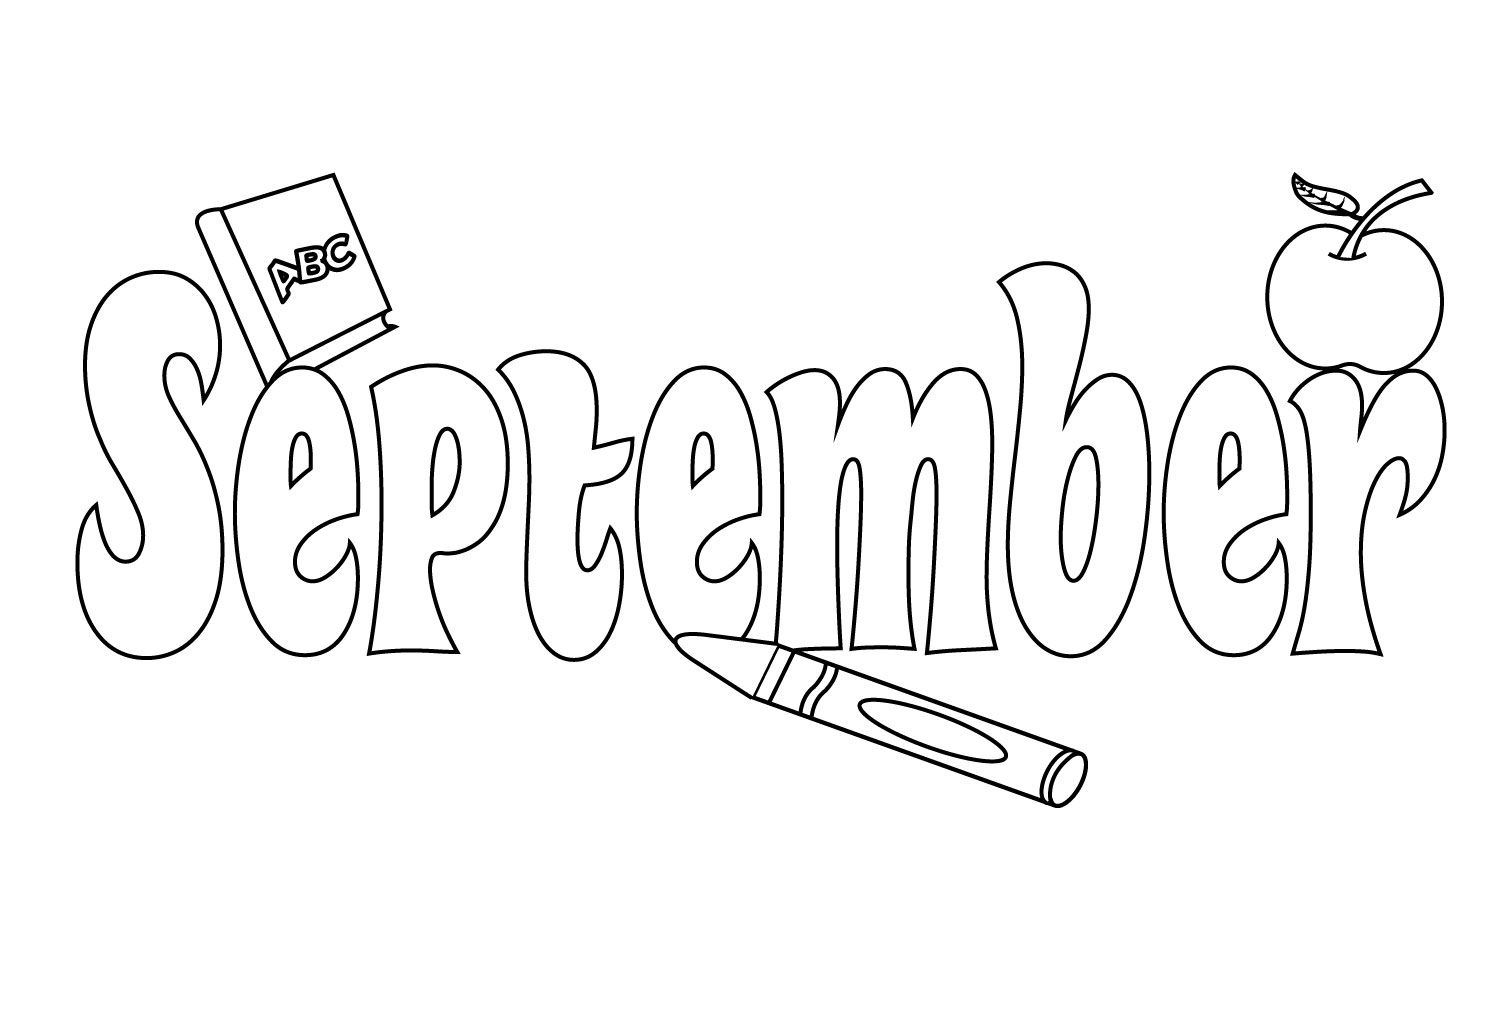 September coloring pages to print preschool kindergarten free printables coloring pages to print coloring pages for kids coloring pages